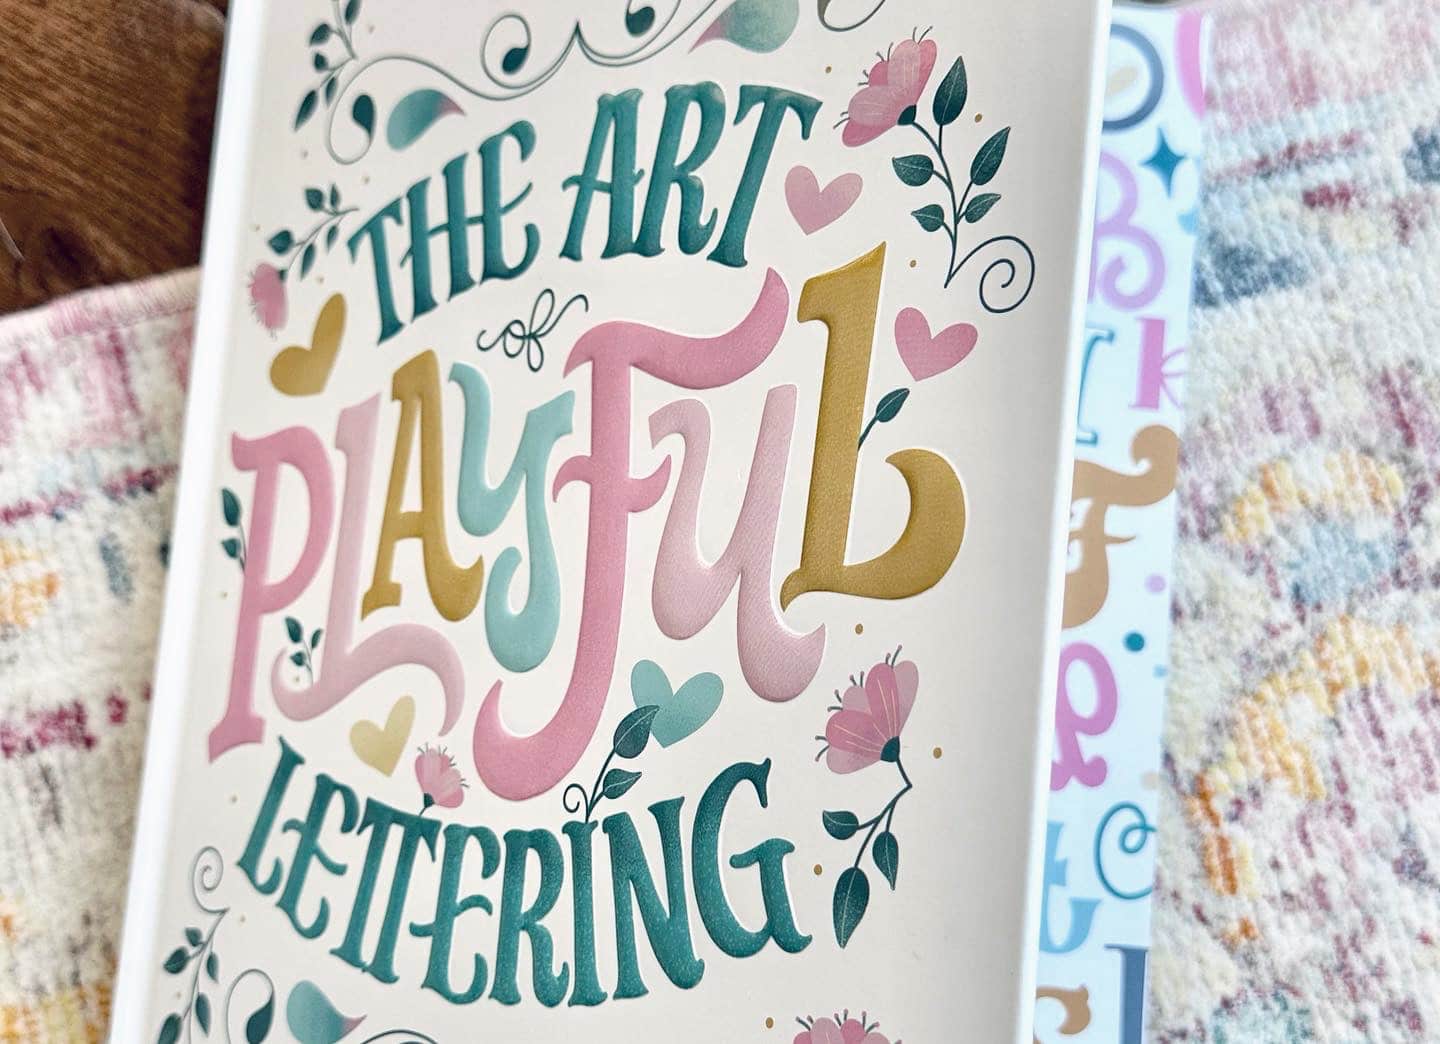 Get my lettering book!